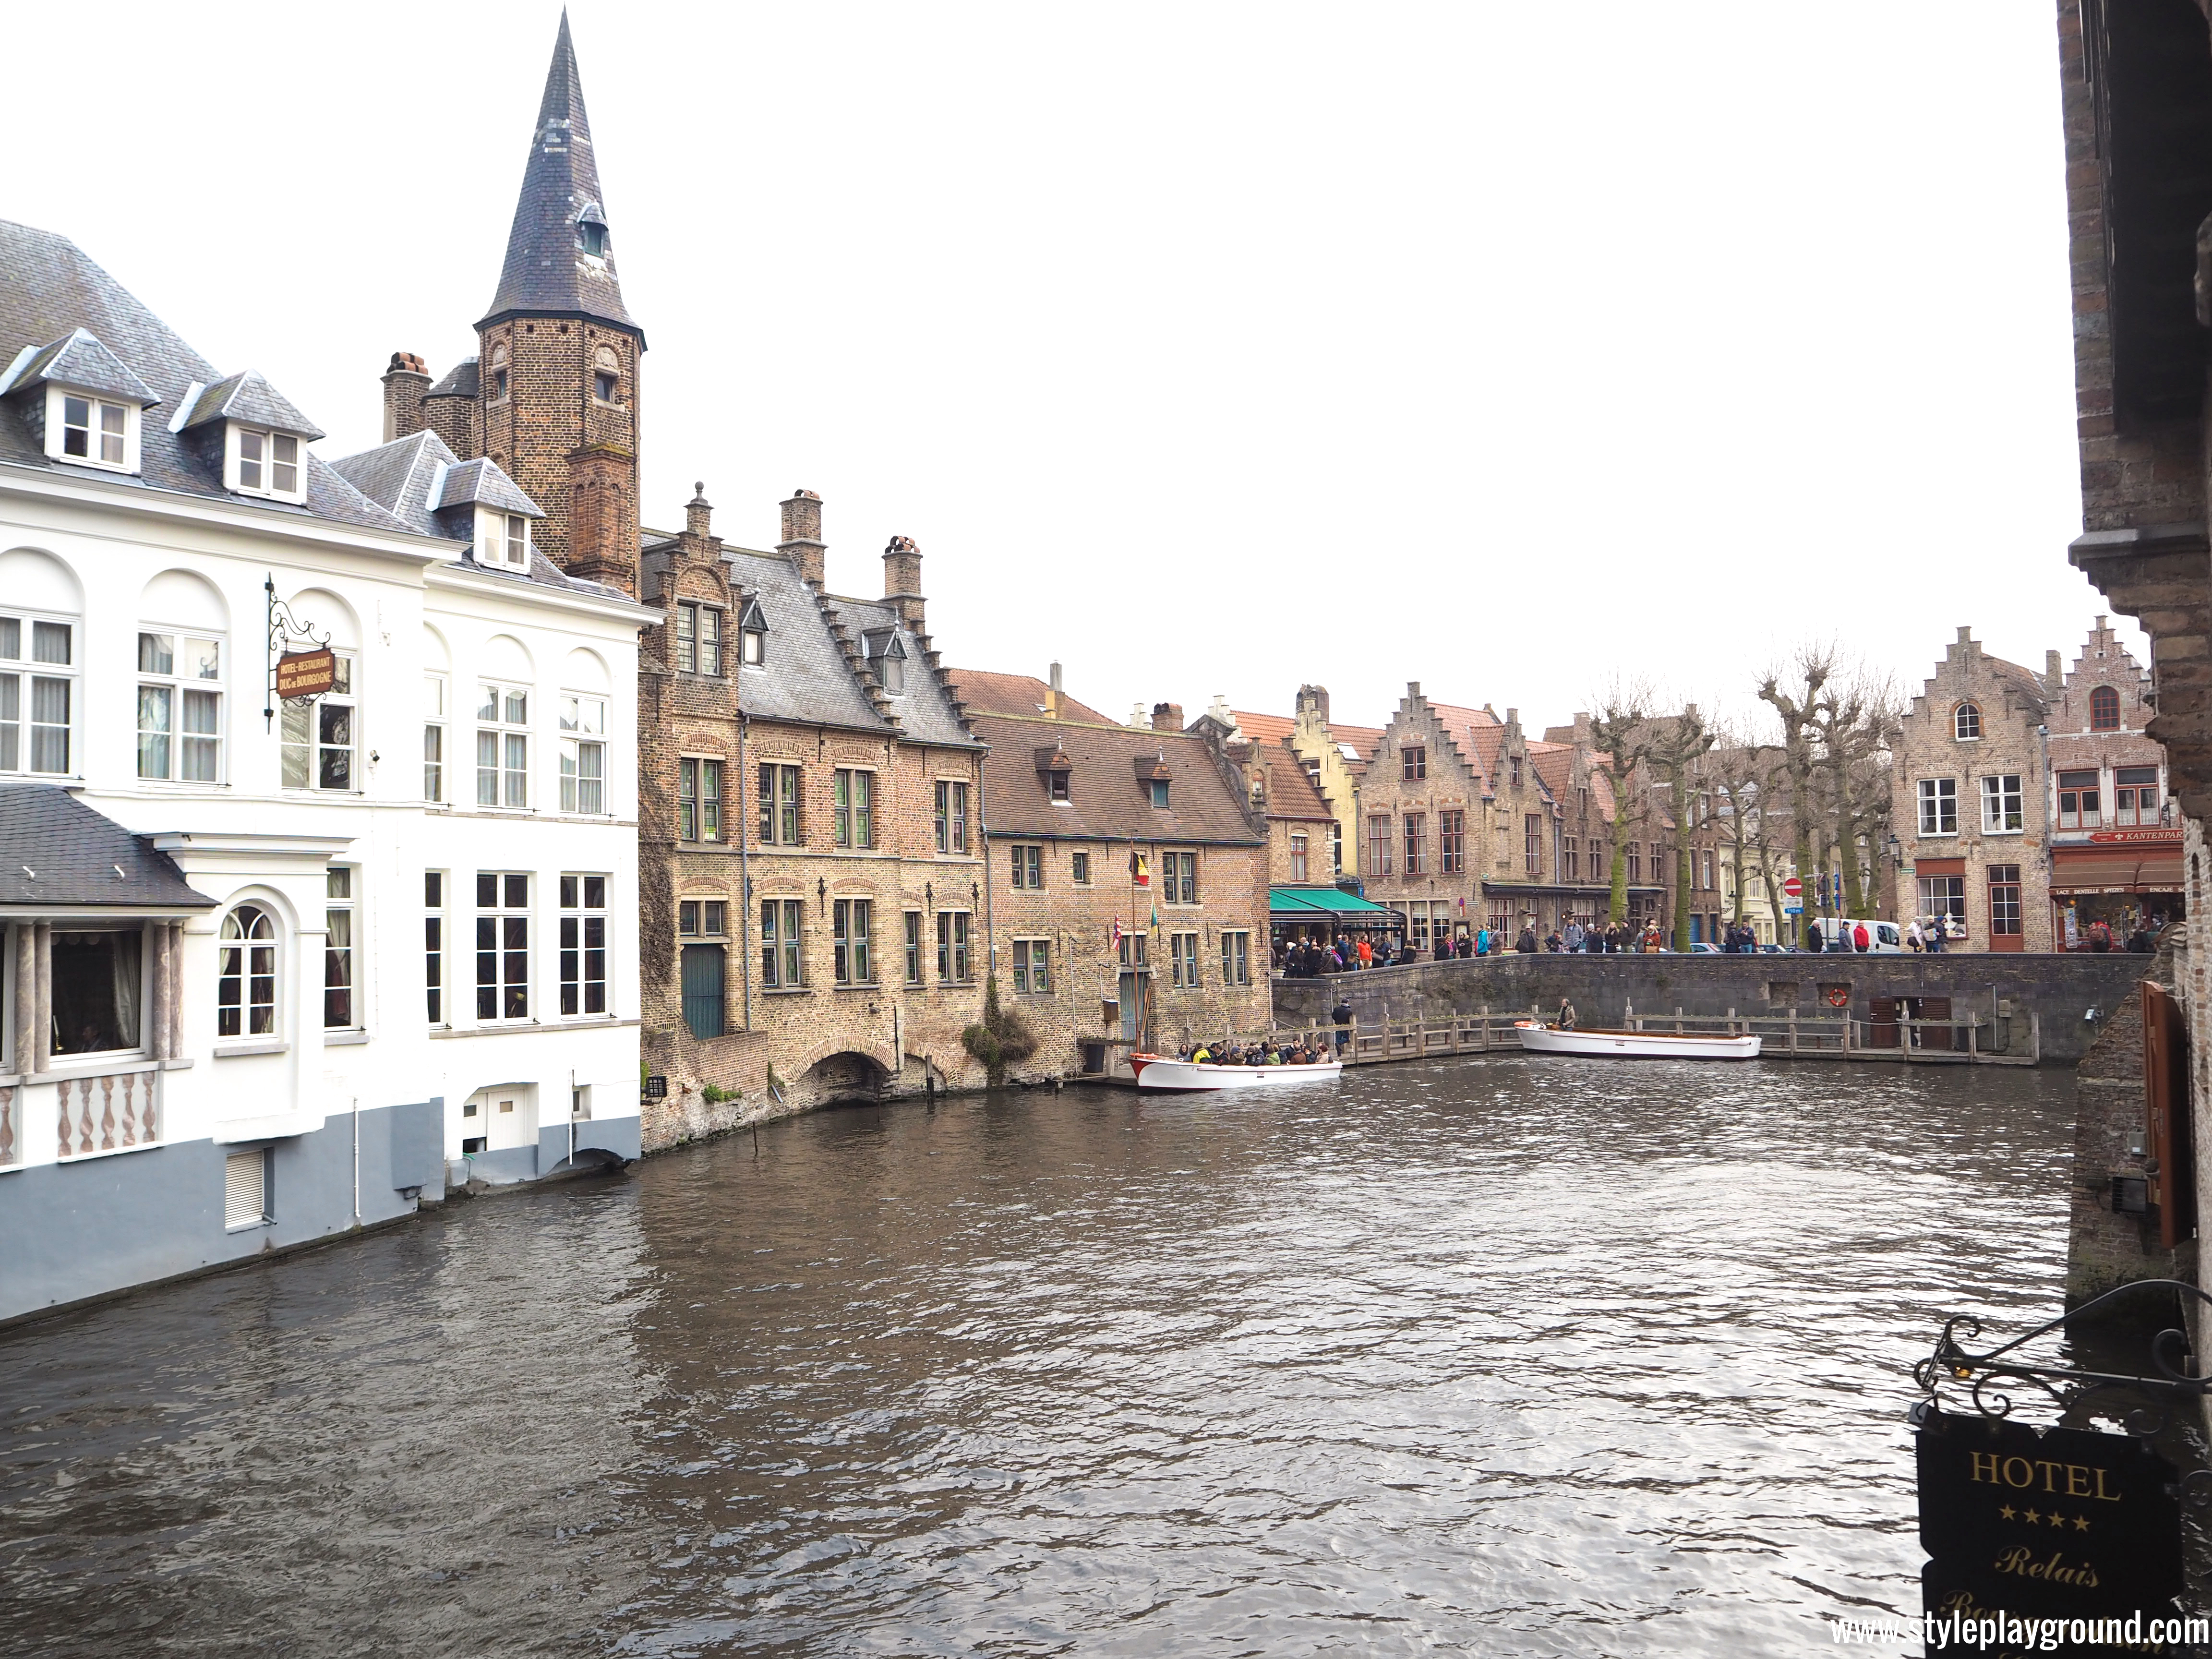 Axelle Blanpain of Style playground shares photos & tips from her weekend trip to Bruges, Belgium